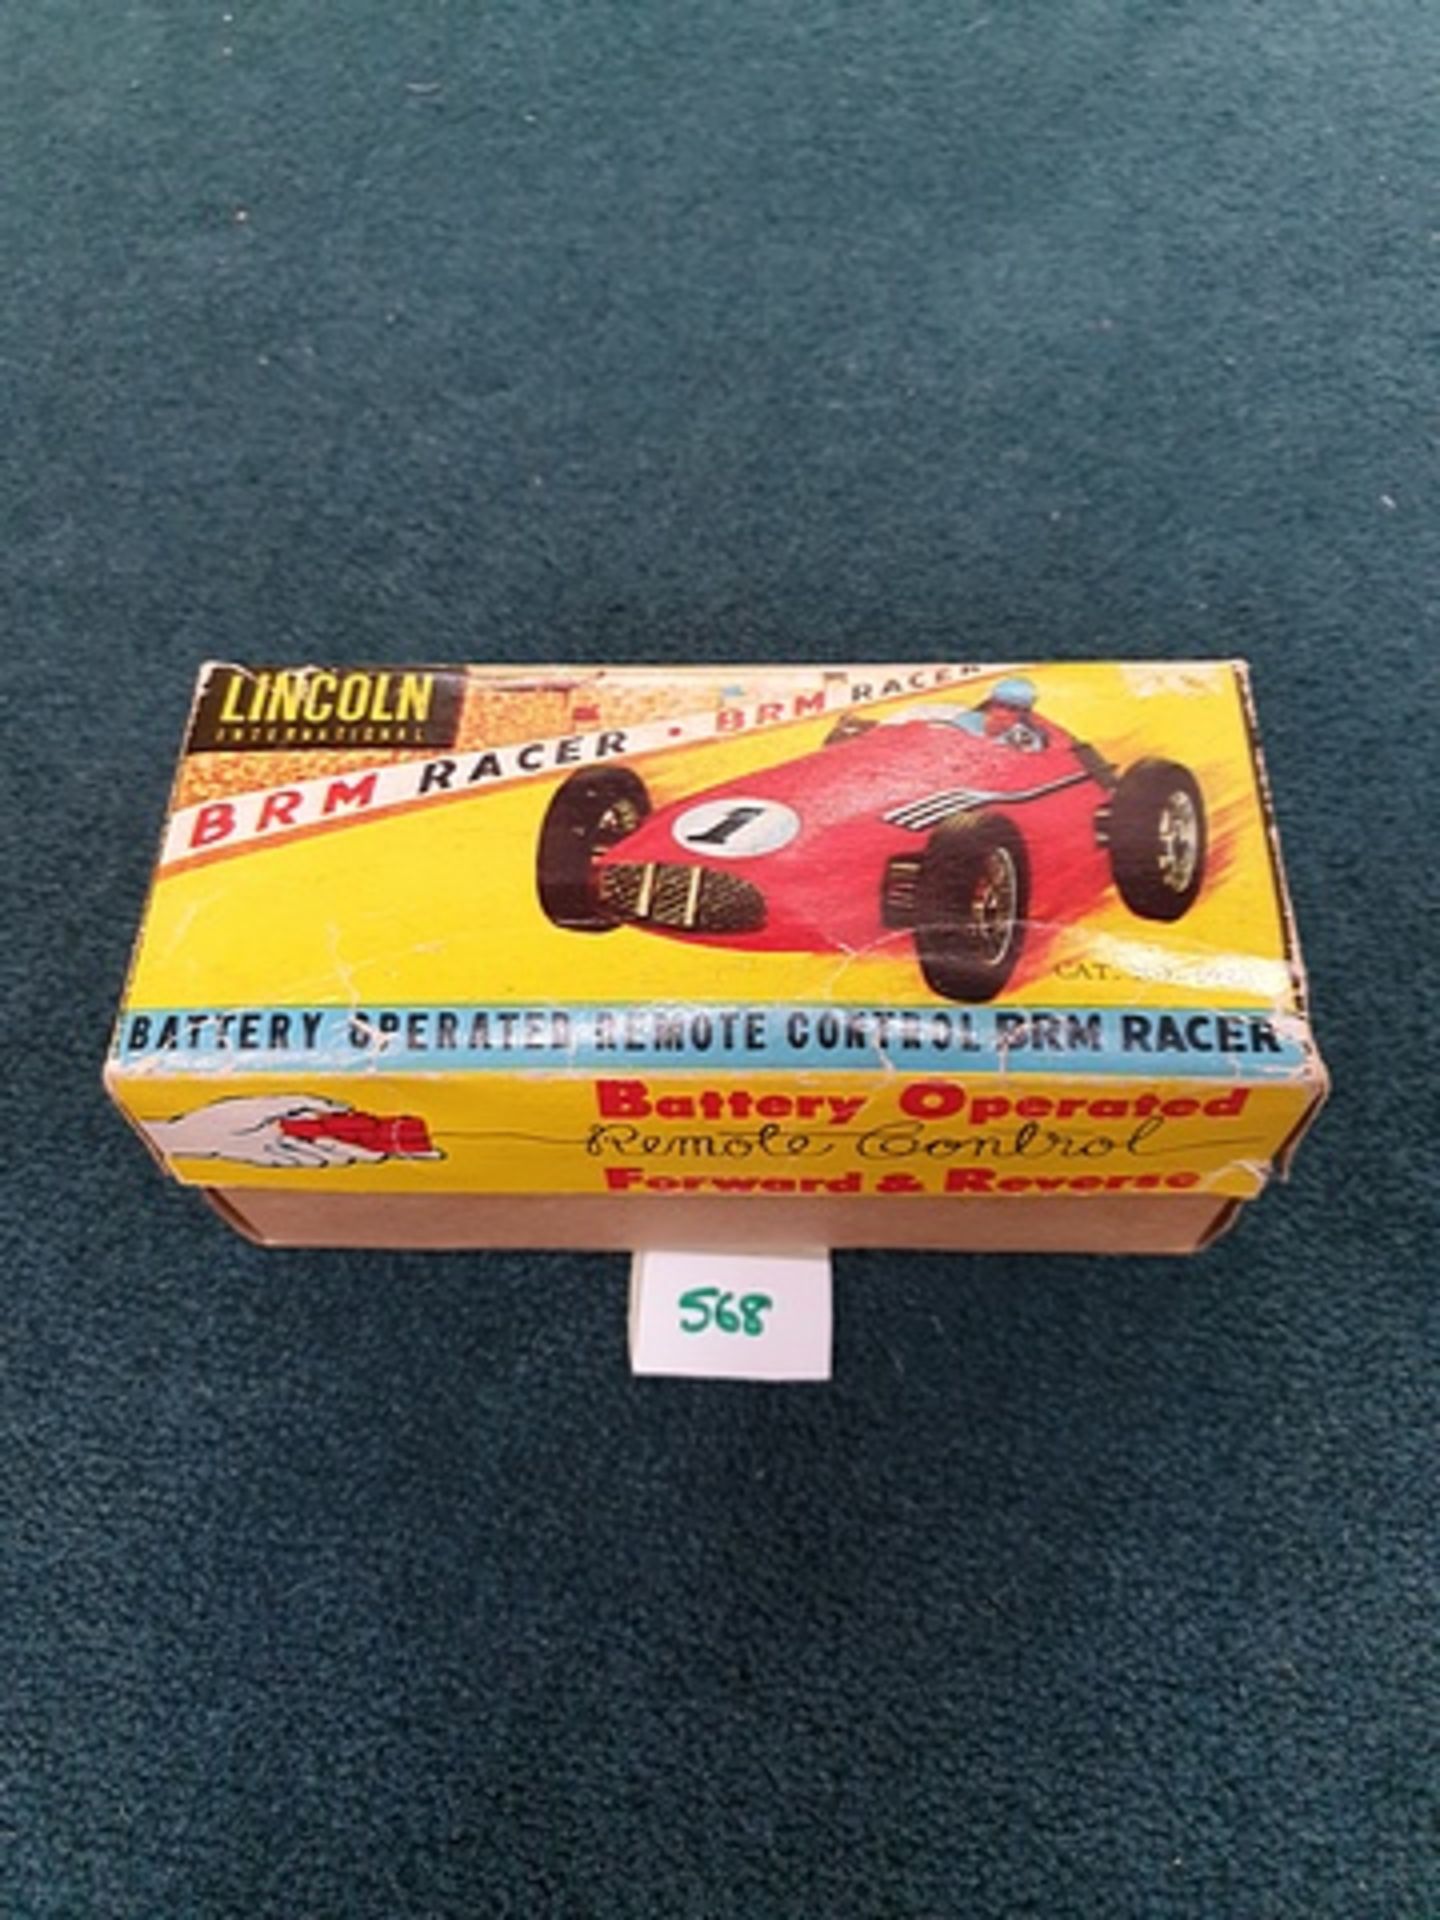 Lincoln International # 5926 Battery Operated Remote Control BRM Racer Complete With Box